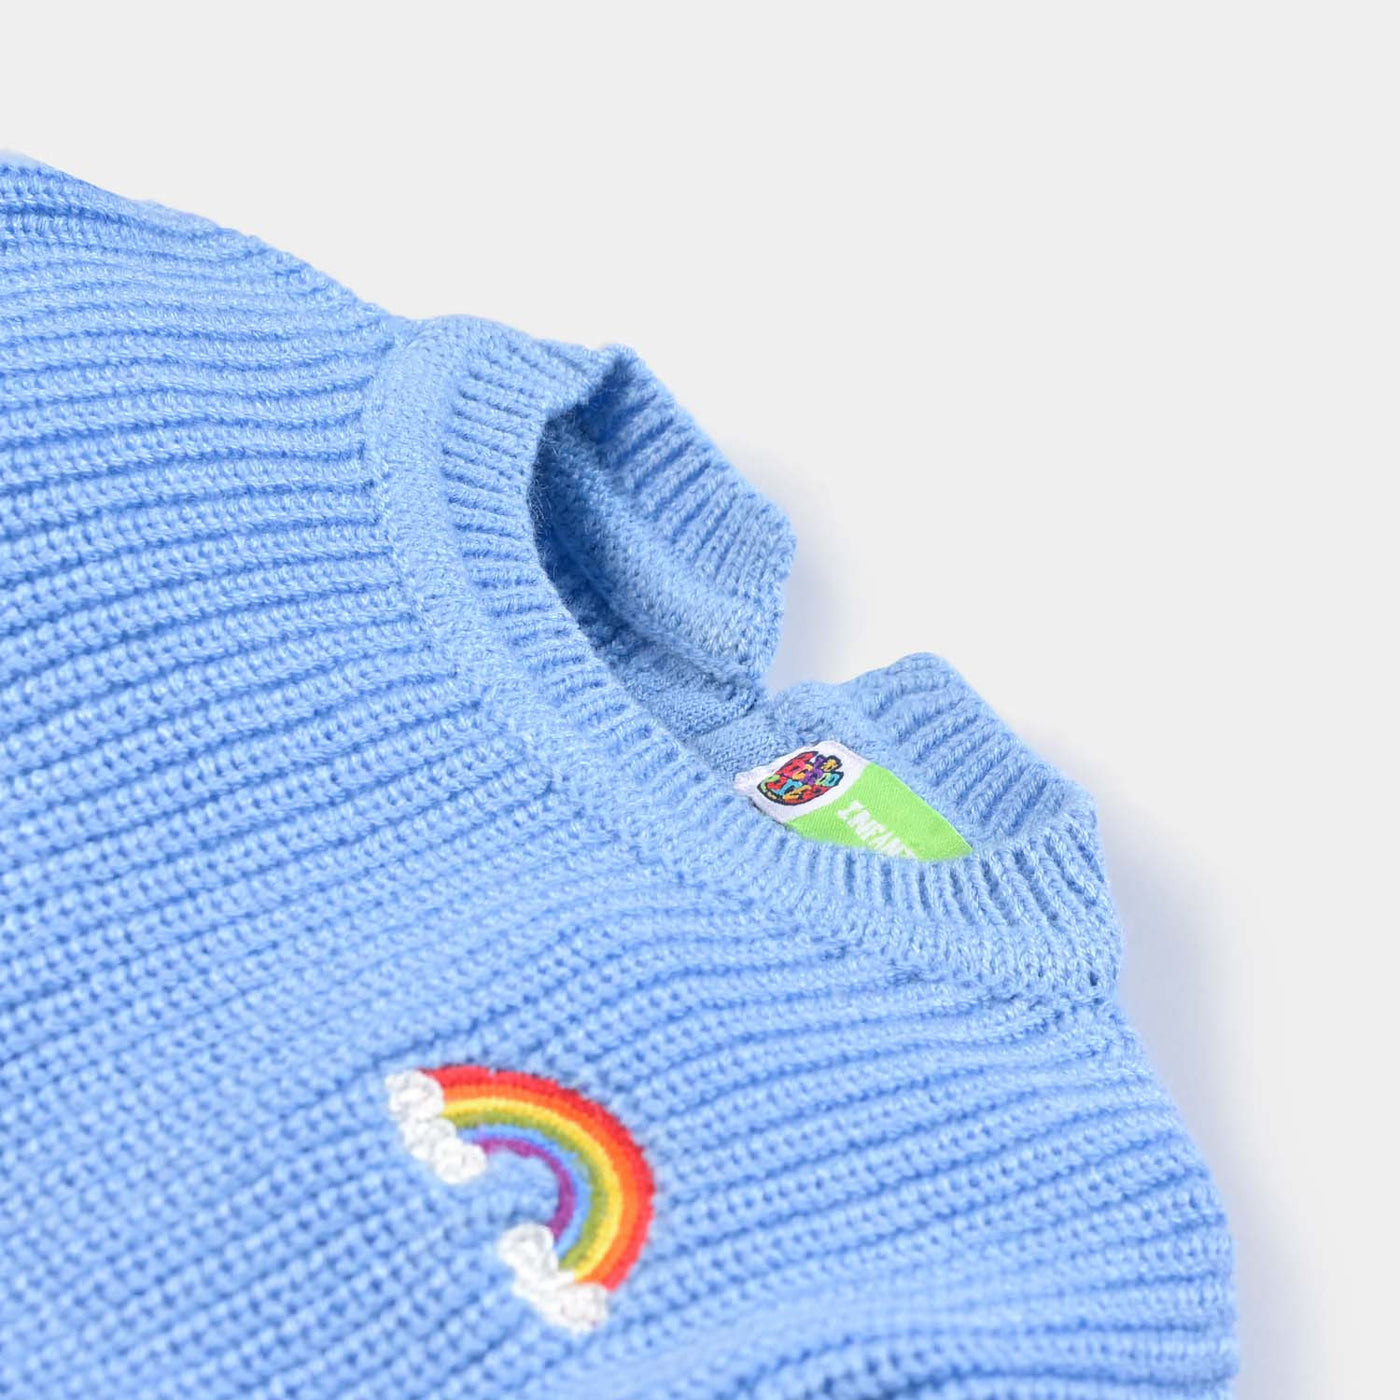 Infant Girls Knitted Sweater Rainbow - L.Blue